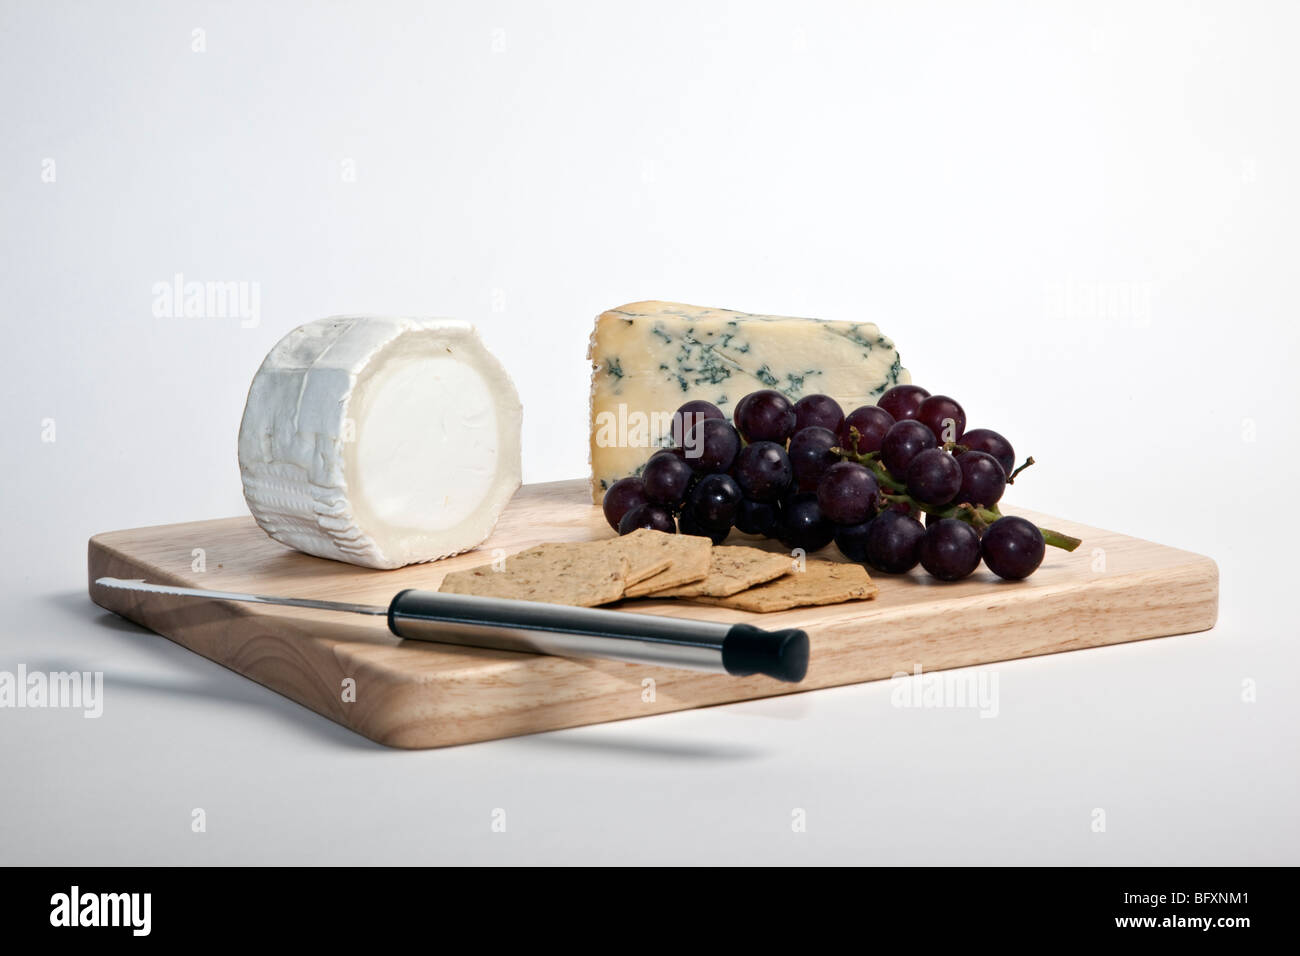 Stilton and goats cheese with red grapes and crackers on a wooden cheese board with cheese knife. Stock Photo